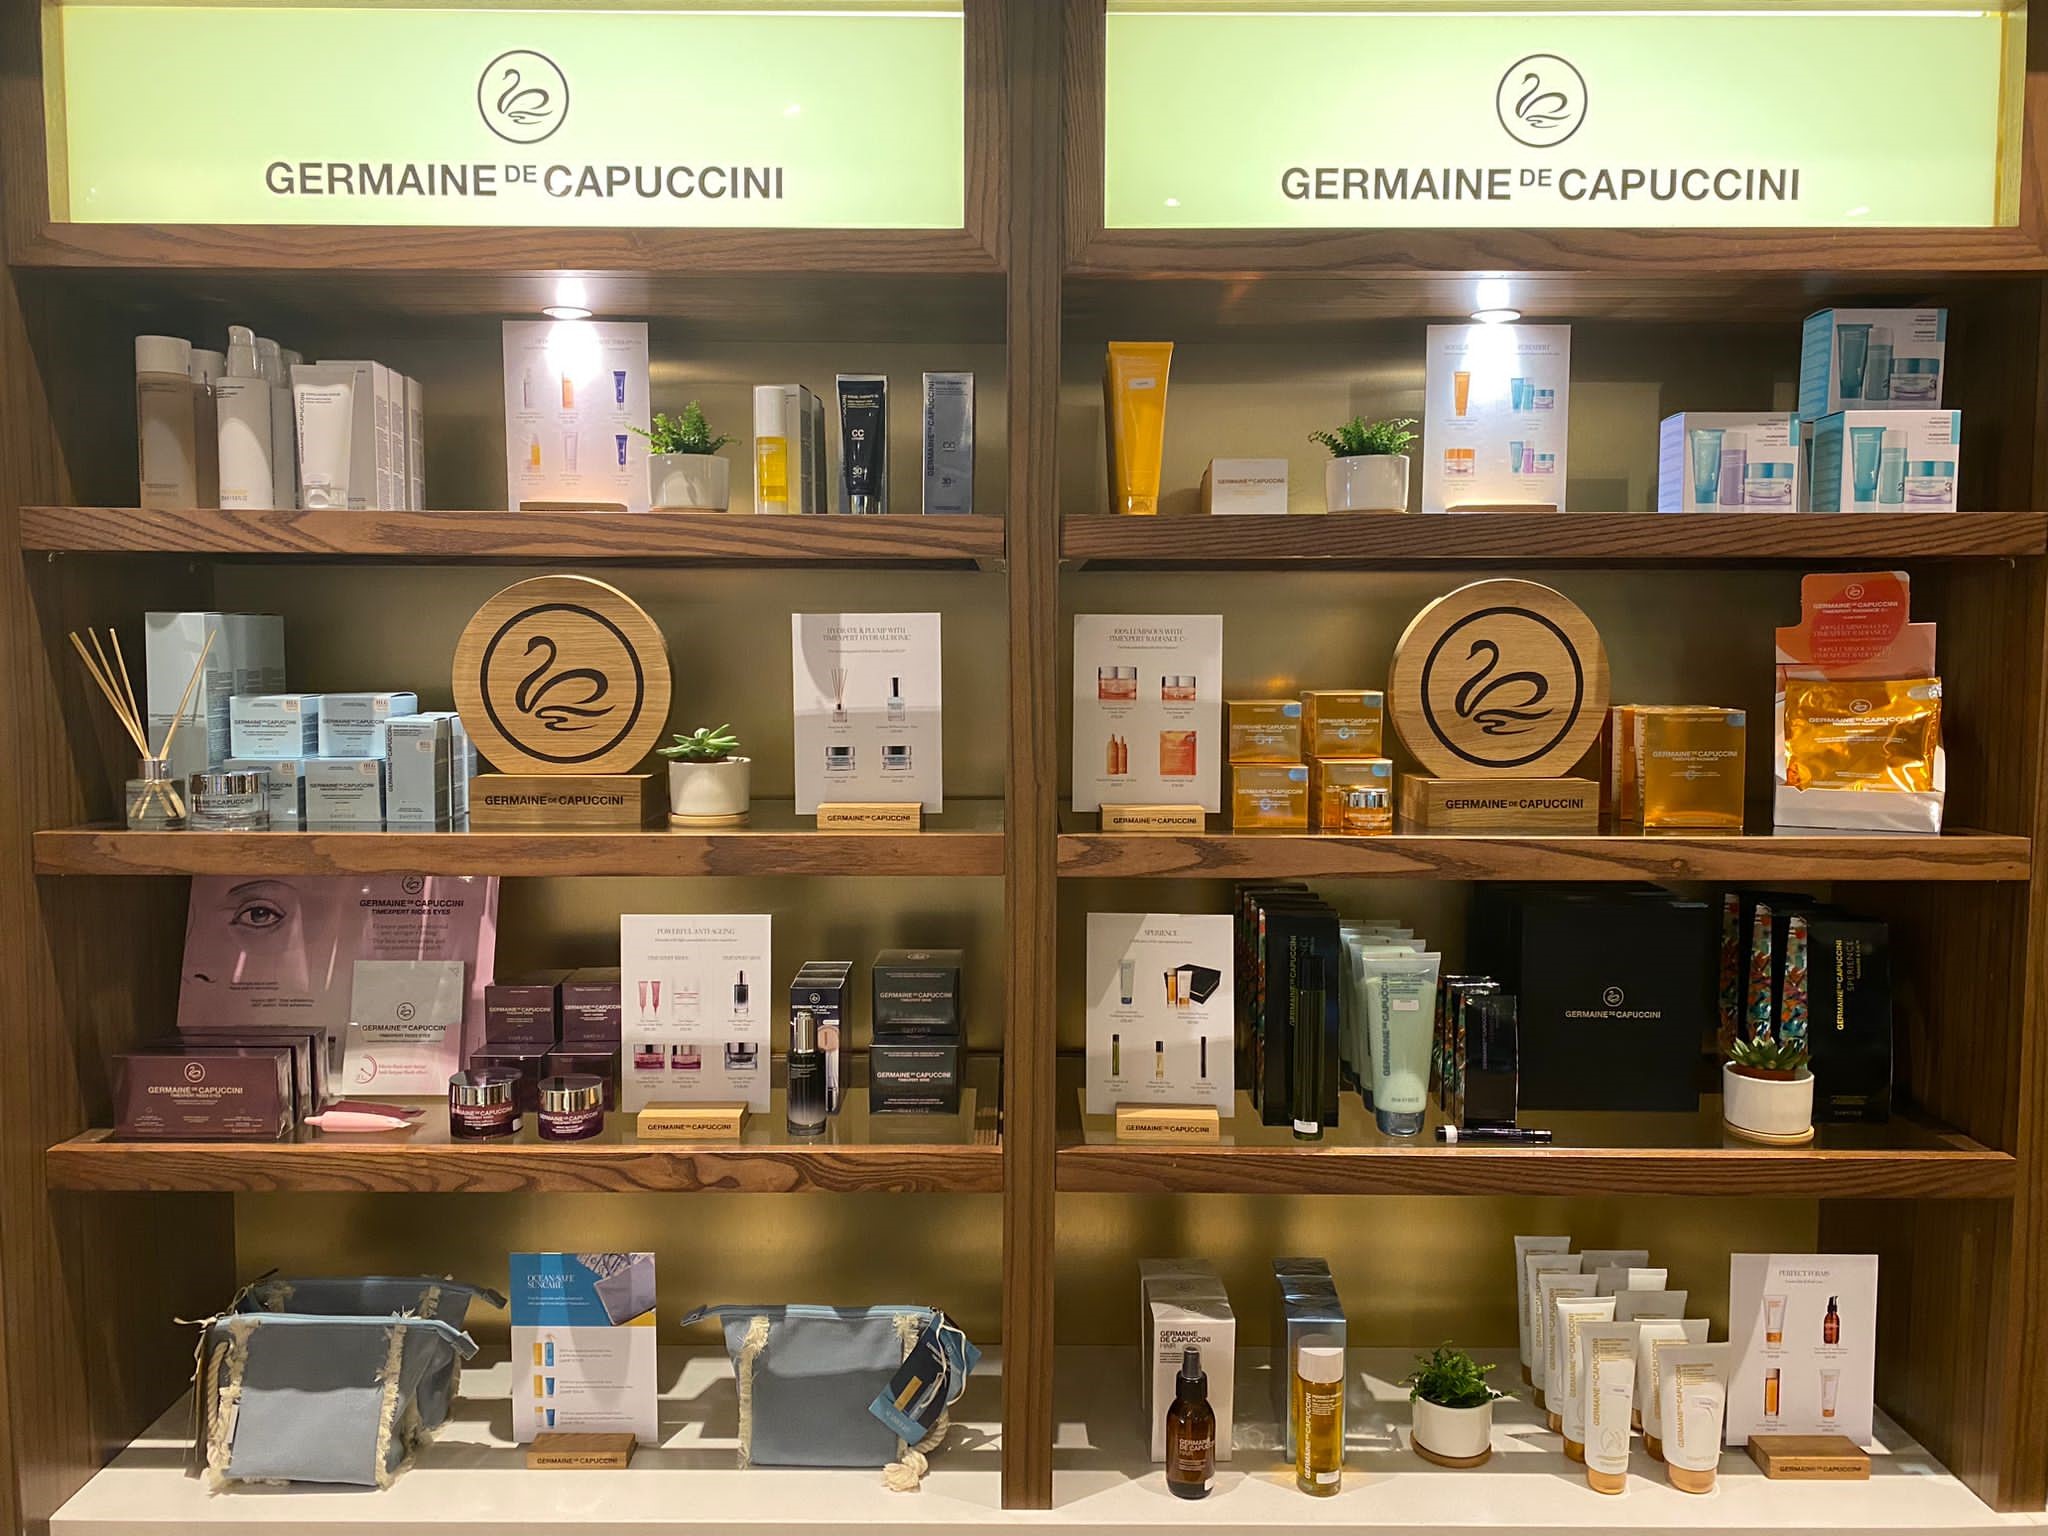 A range of Germaine de Capuccini products